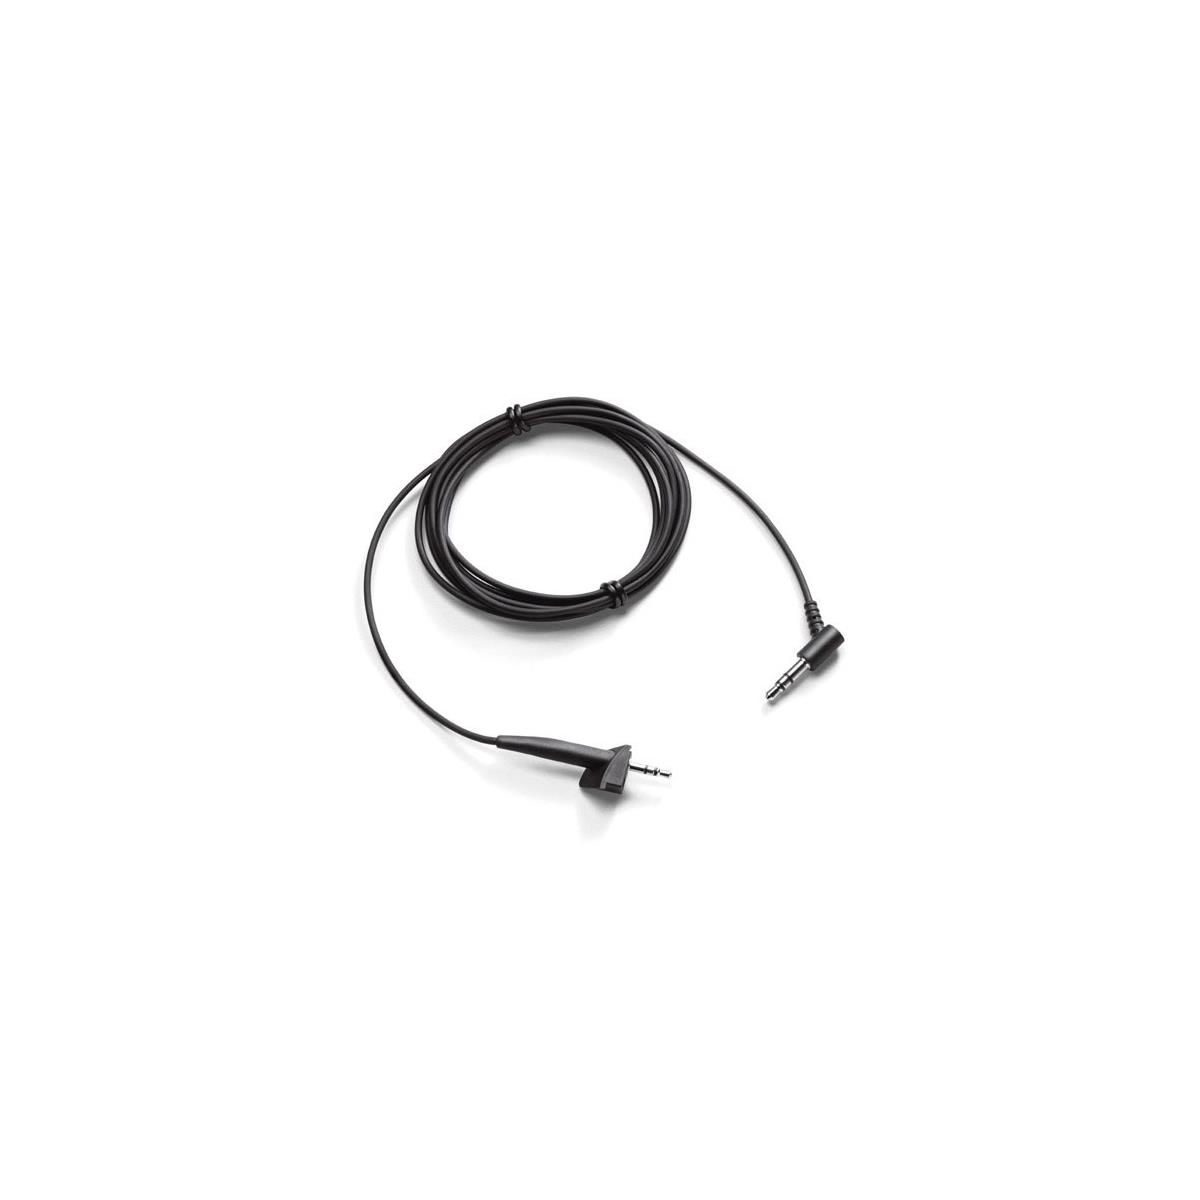 Image of Bose Audio Cable for AE2 Headphones